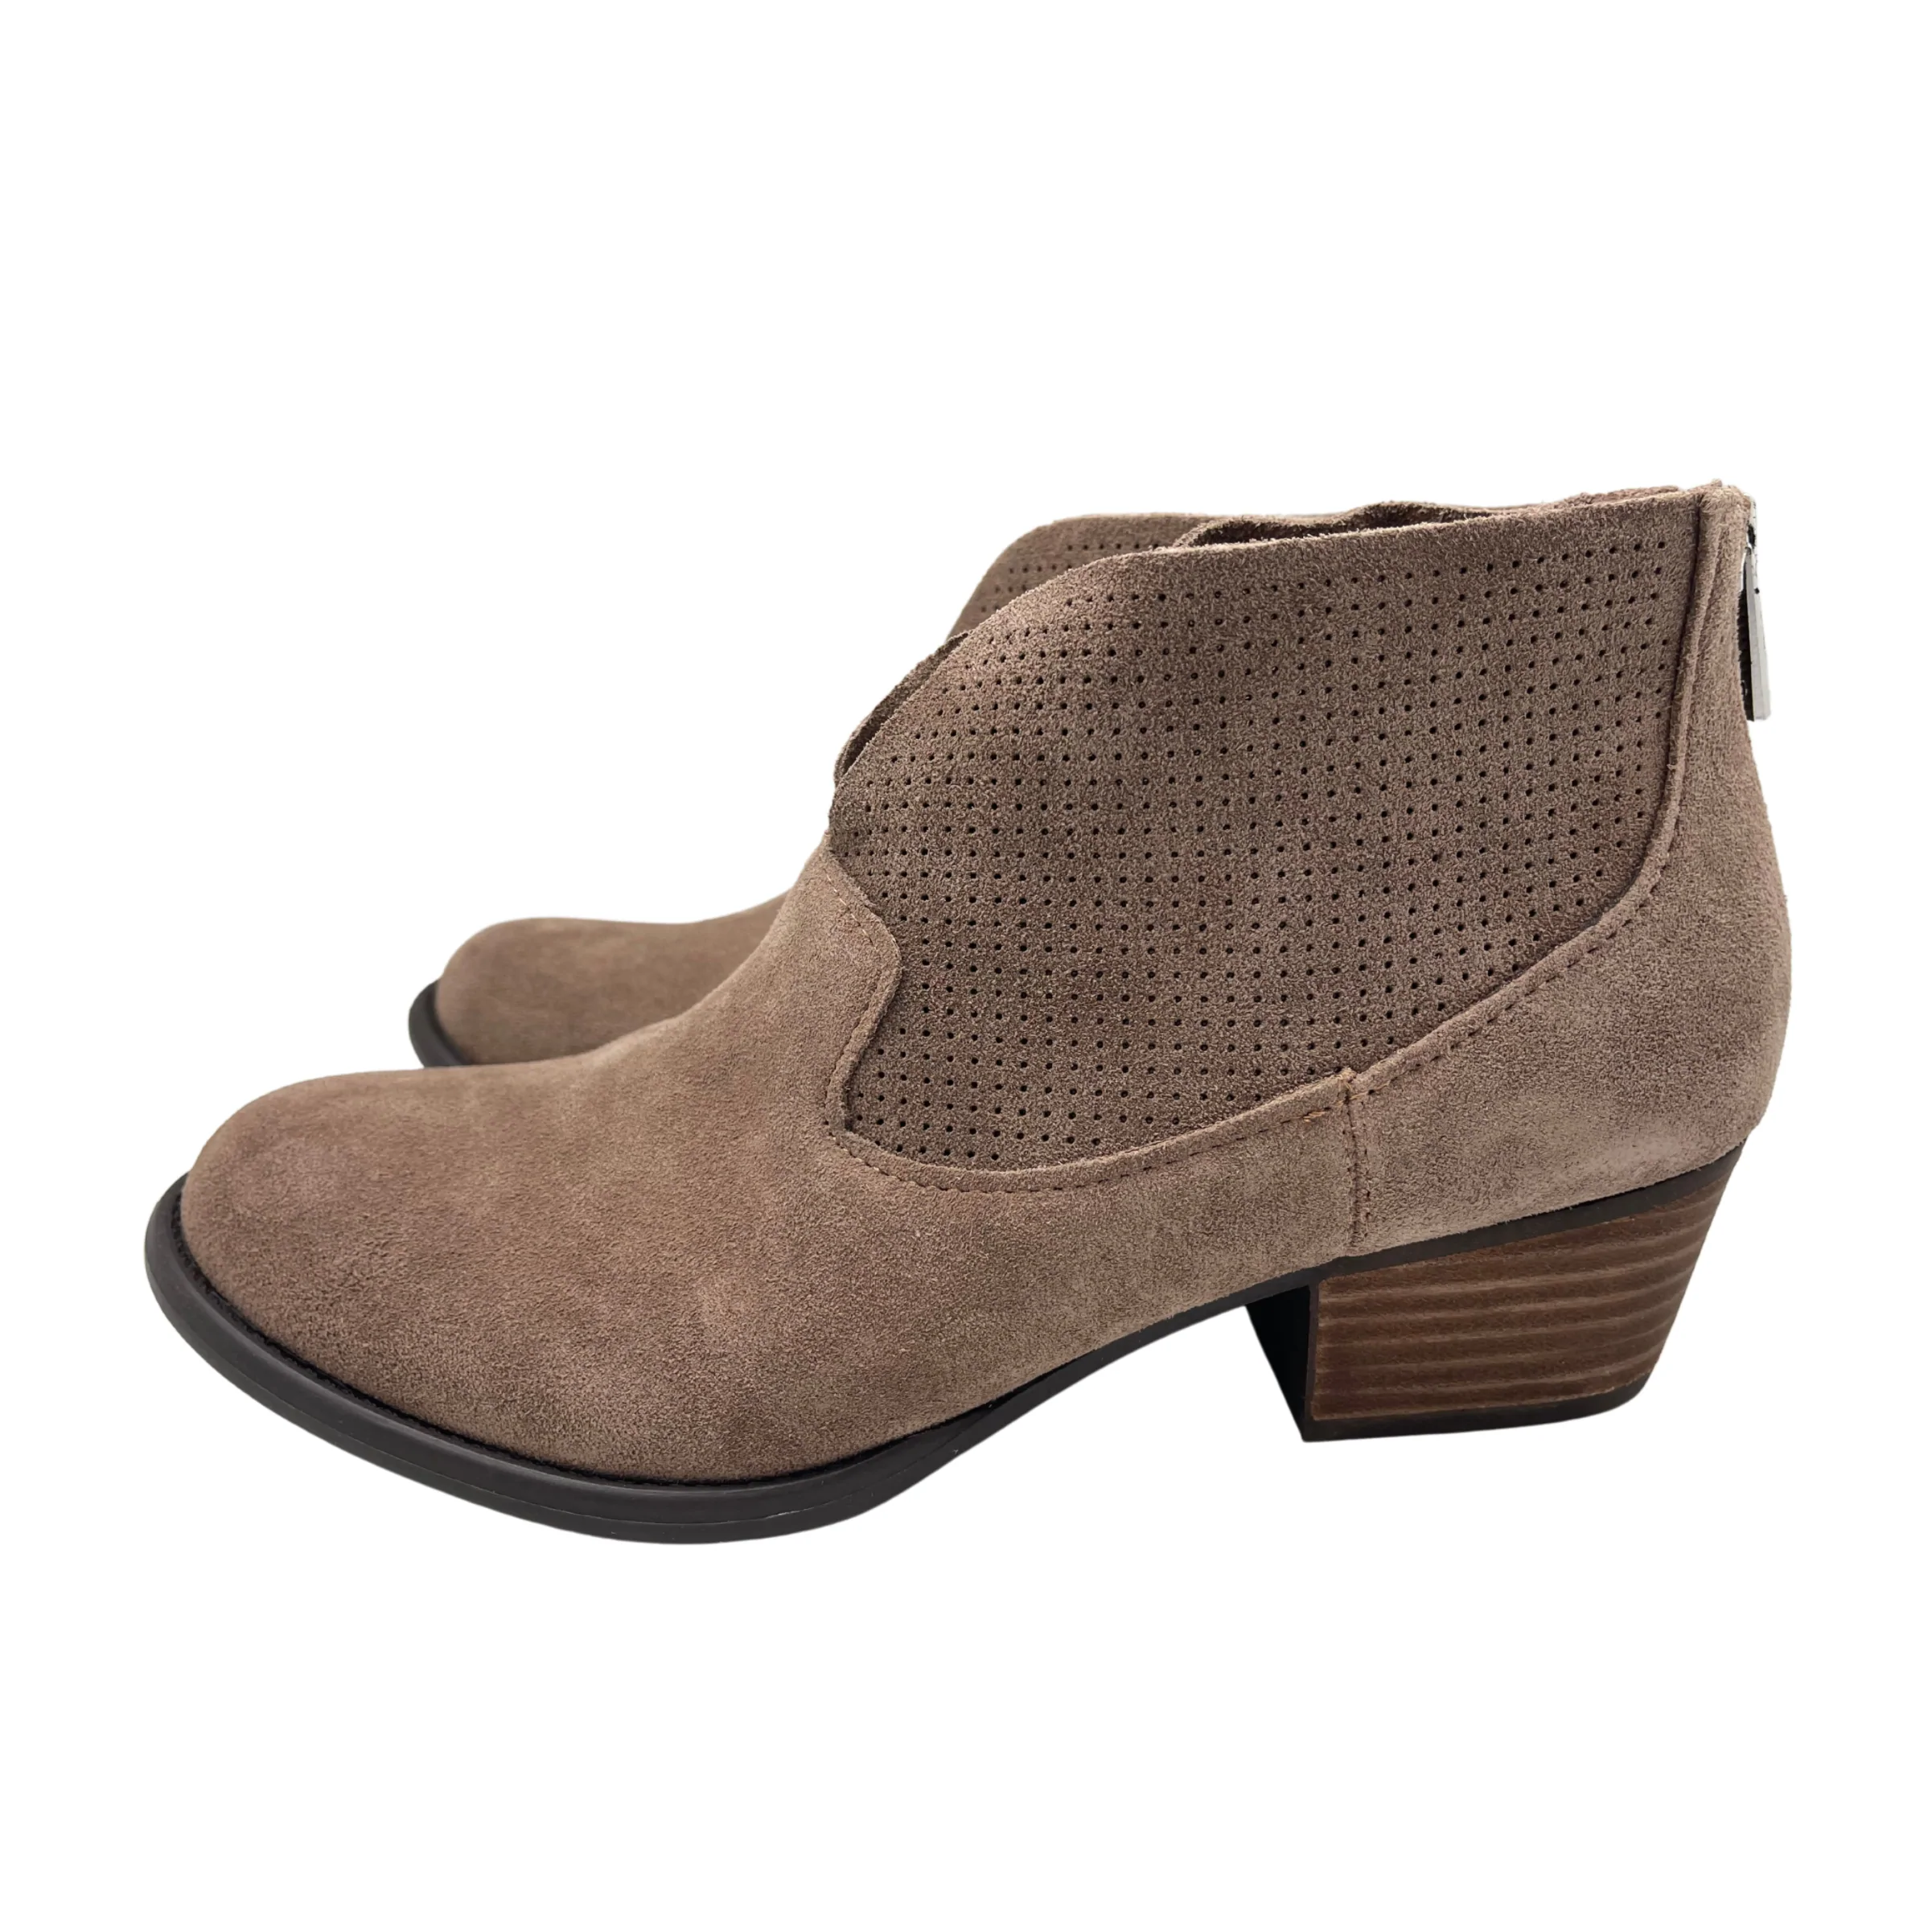 Jessica Simpson Women's Ankle Boots / JS-Dacia / Suede / Taupe / Size 8.5